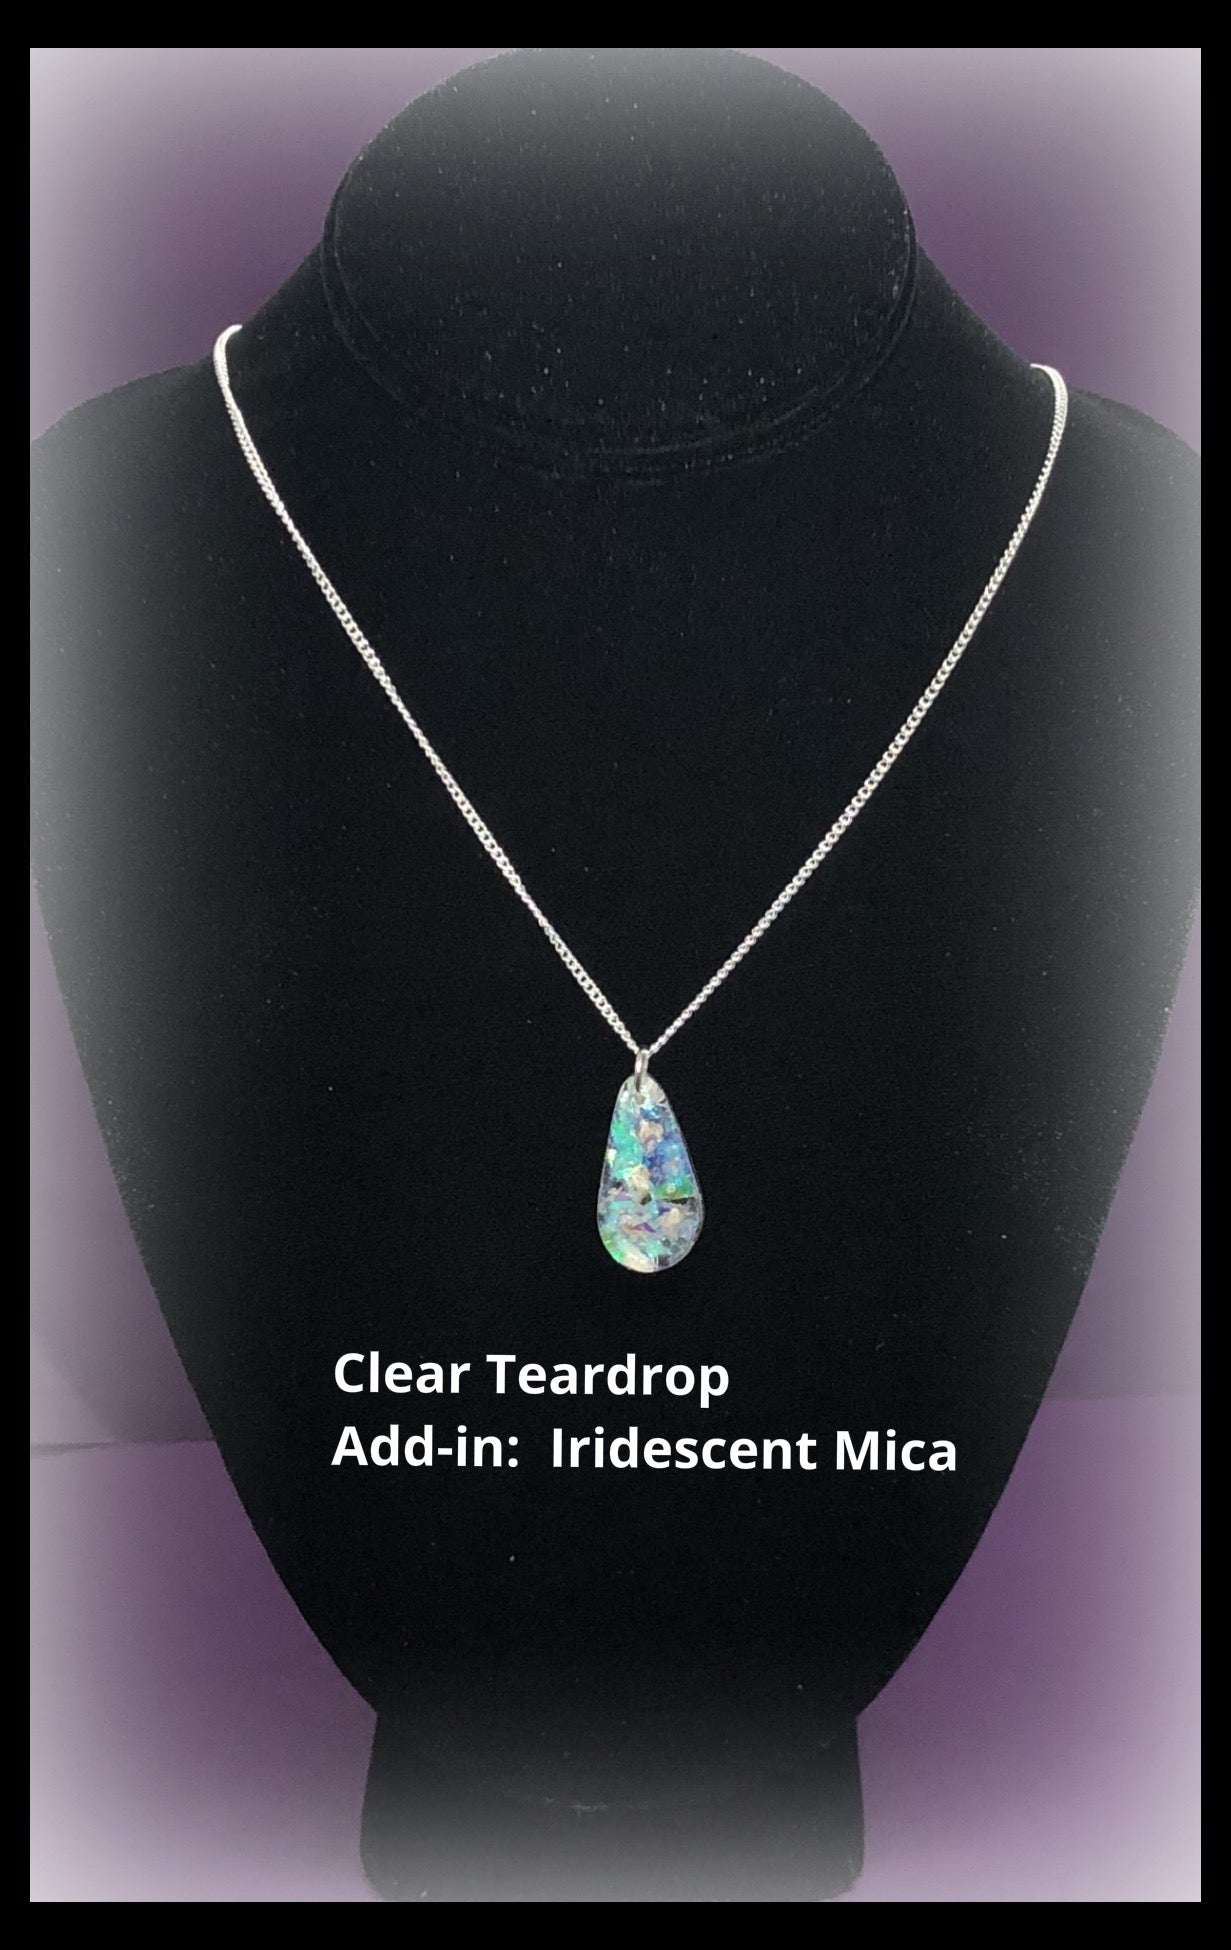 Resin Gem Shaped Pendant with Cremains